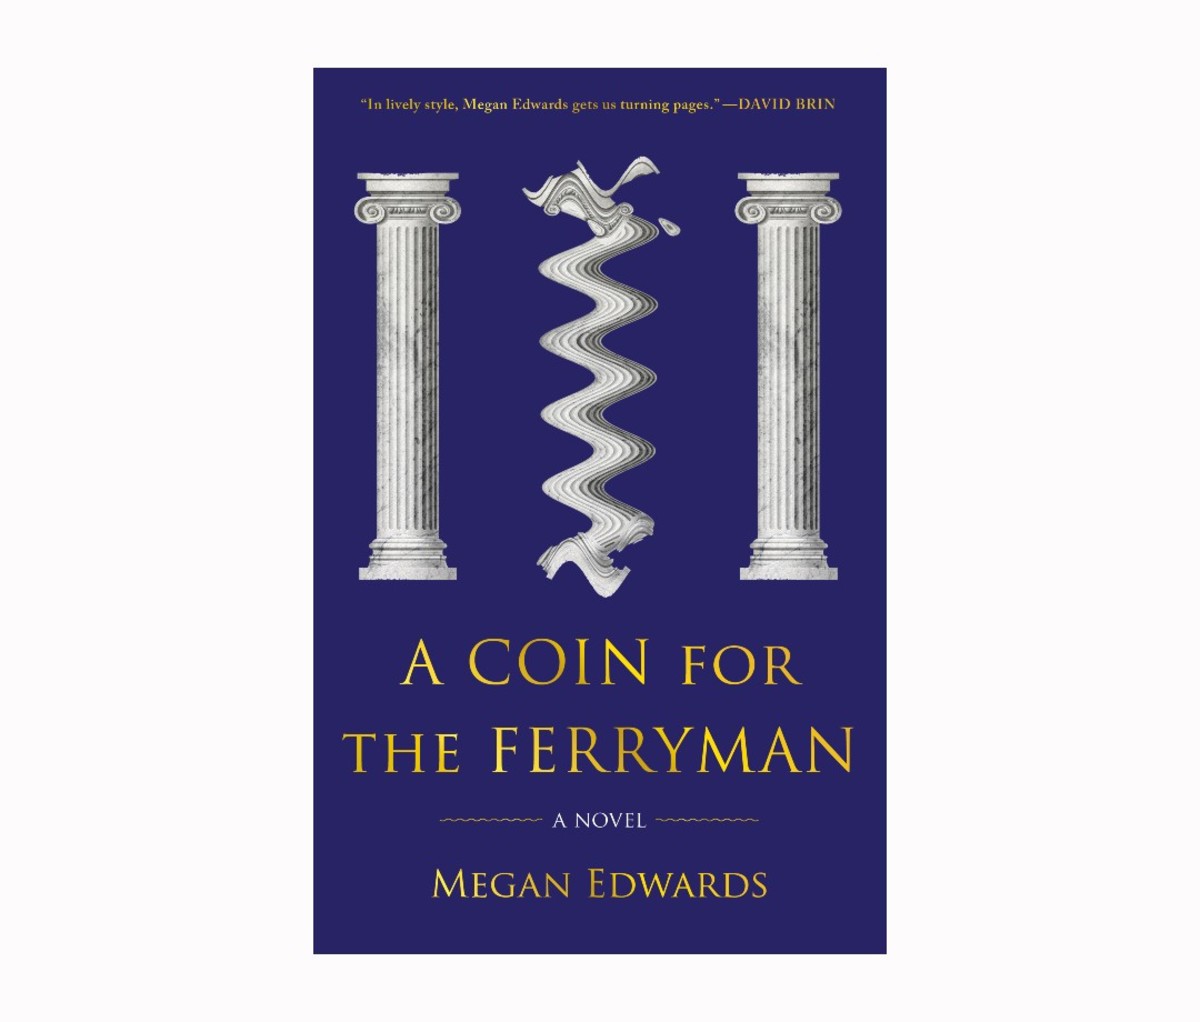 A Coin for the Ferryman by Megan Edwards